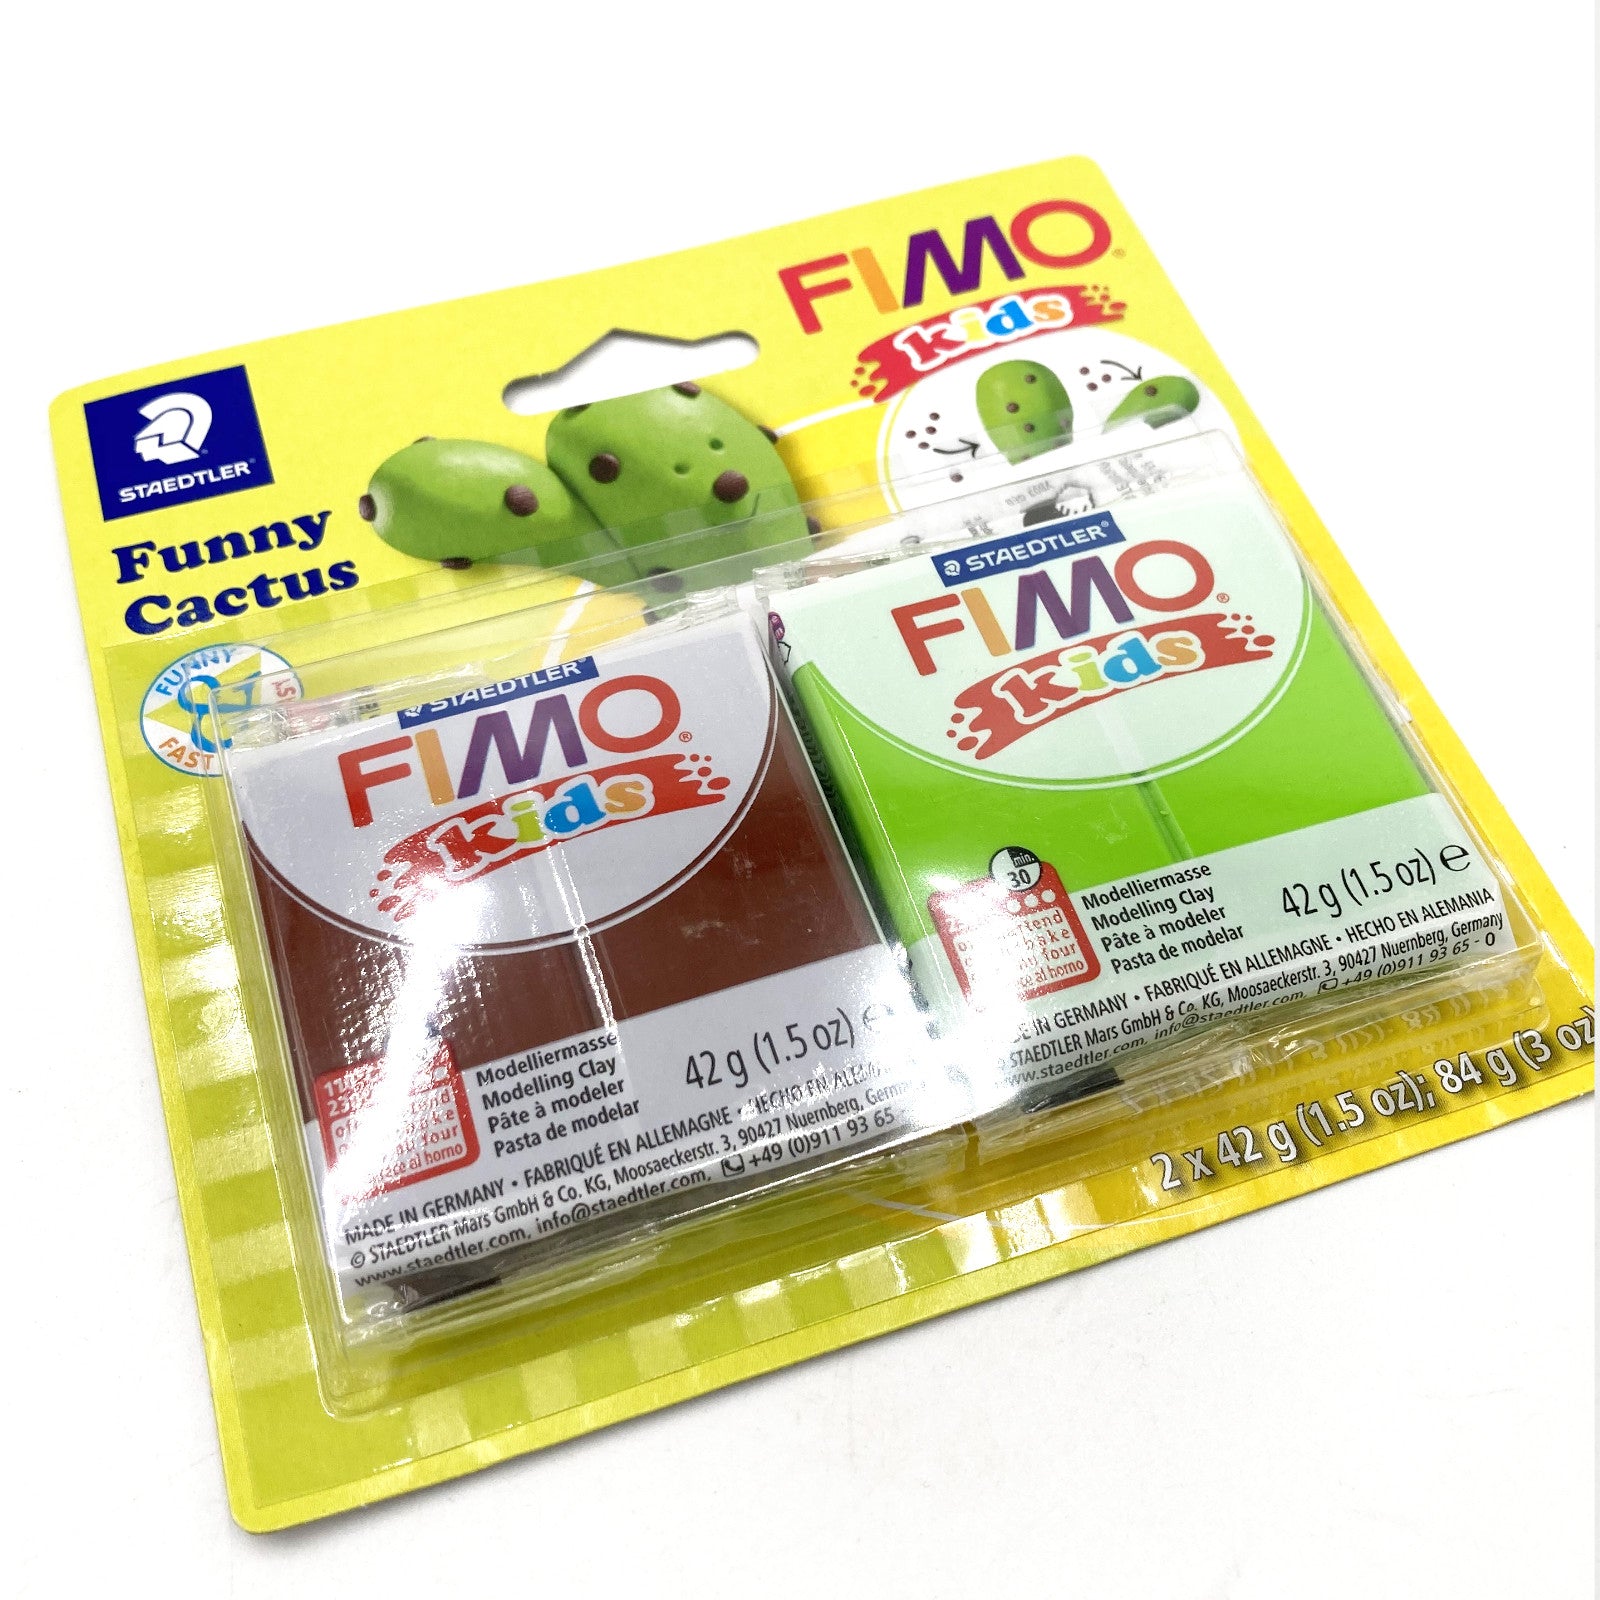 FIMO Funny Cactus Modelling Clay